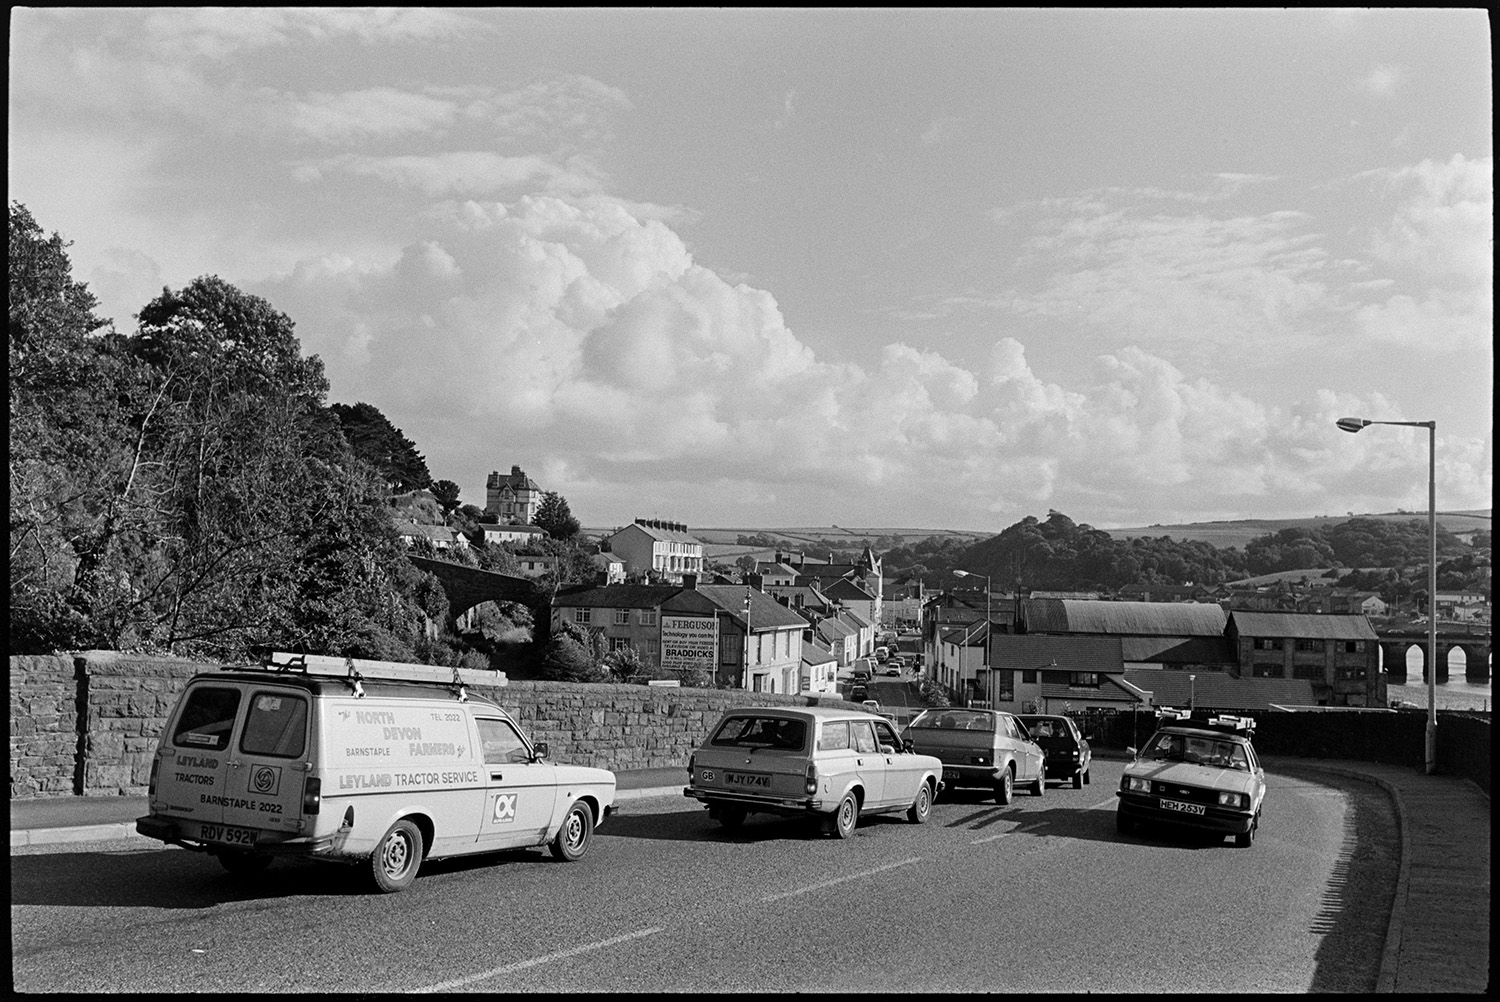 View over town with cars parked beside road. 
[A view of East the Water, Bideford with buildings and cars on a road. Part of Bideford Long Bridge, also known as Bideford Old Bridge, can be seen in the background. In the distance trees, fields and clouds are visible.]